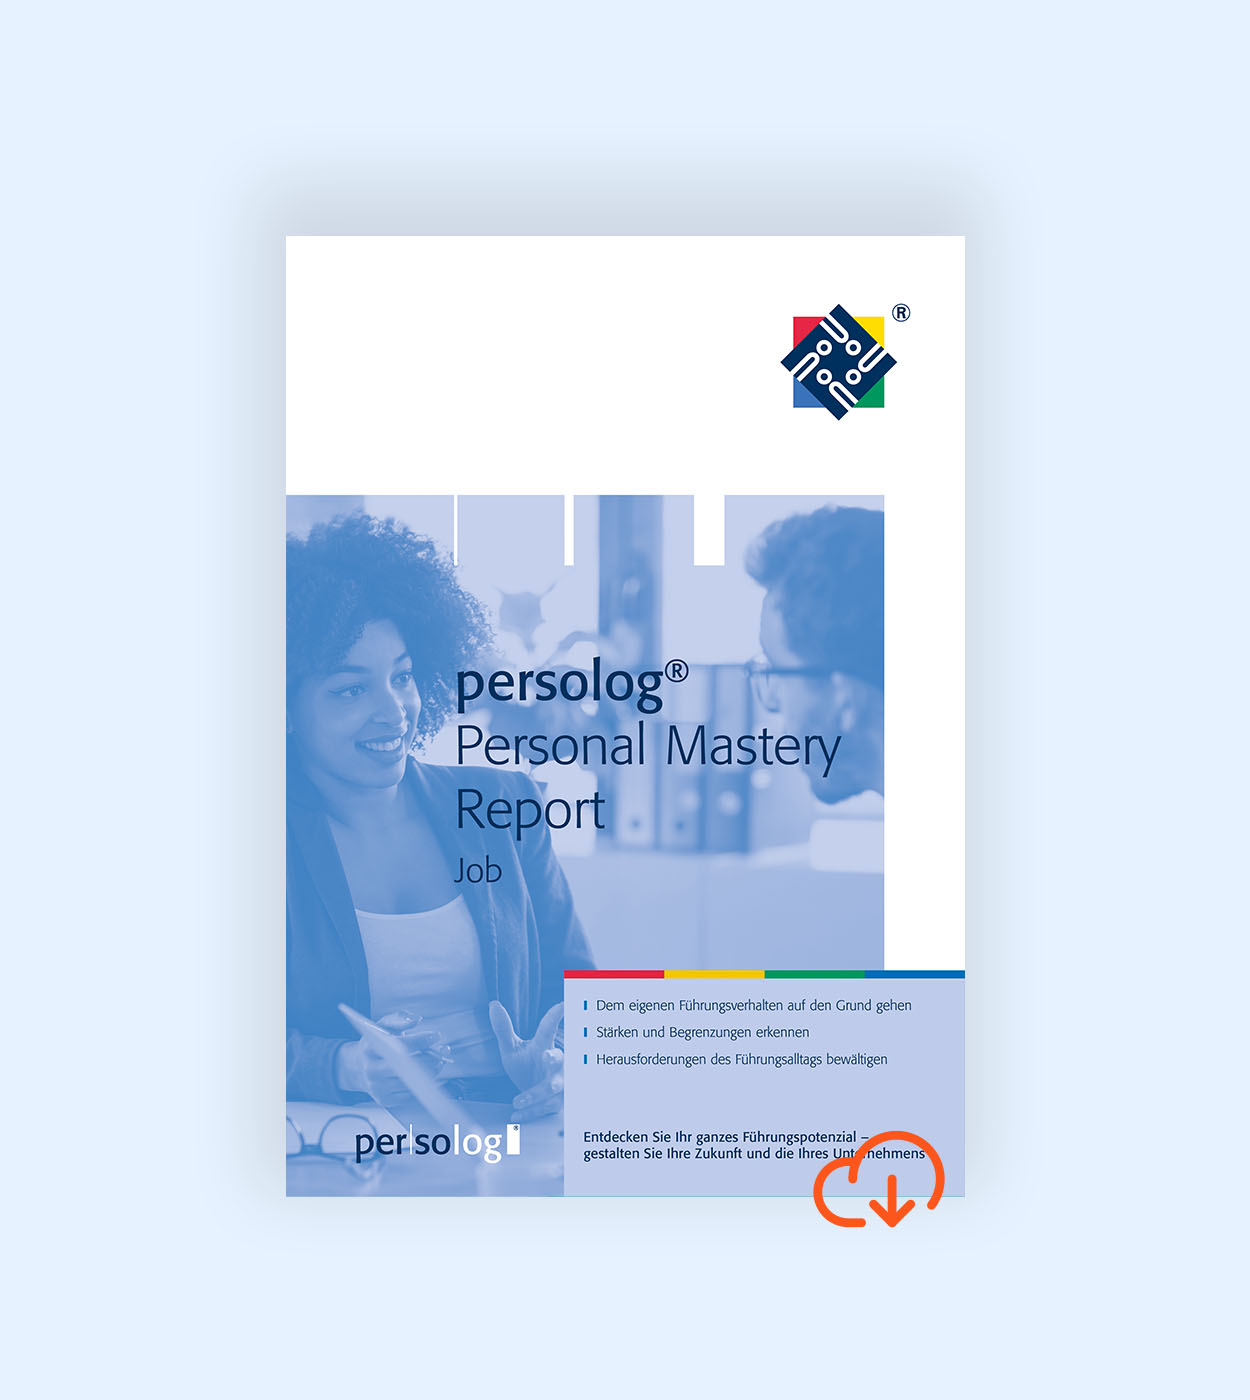 persolog® Personal Mastery Report Job online 